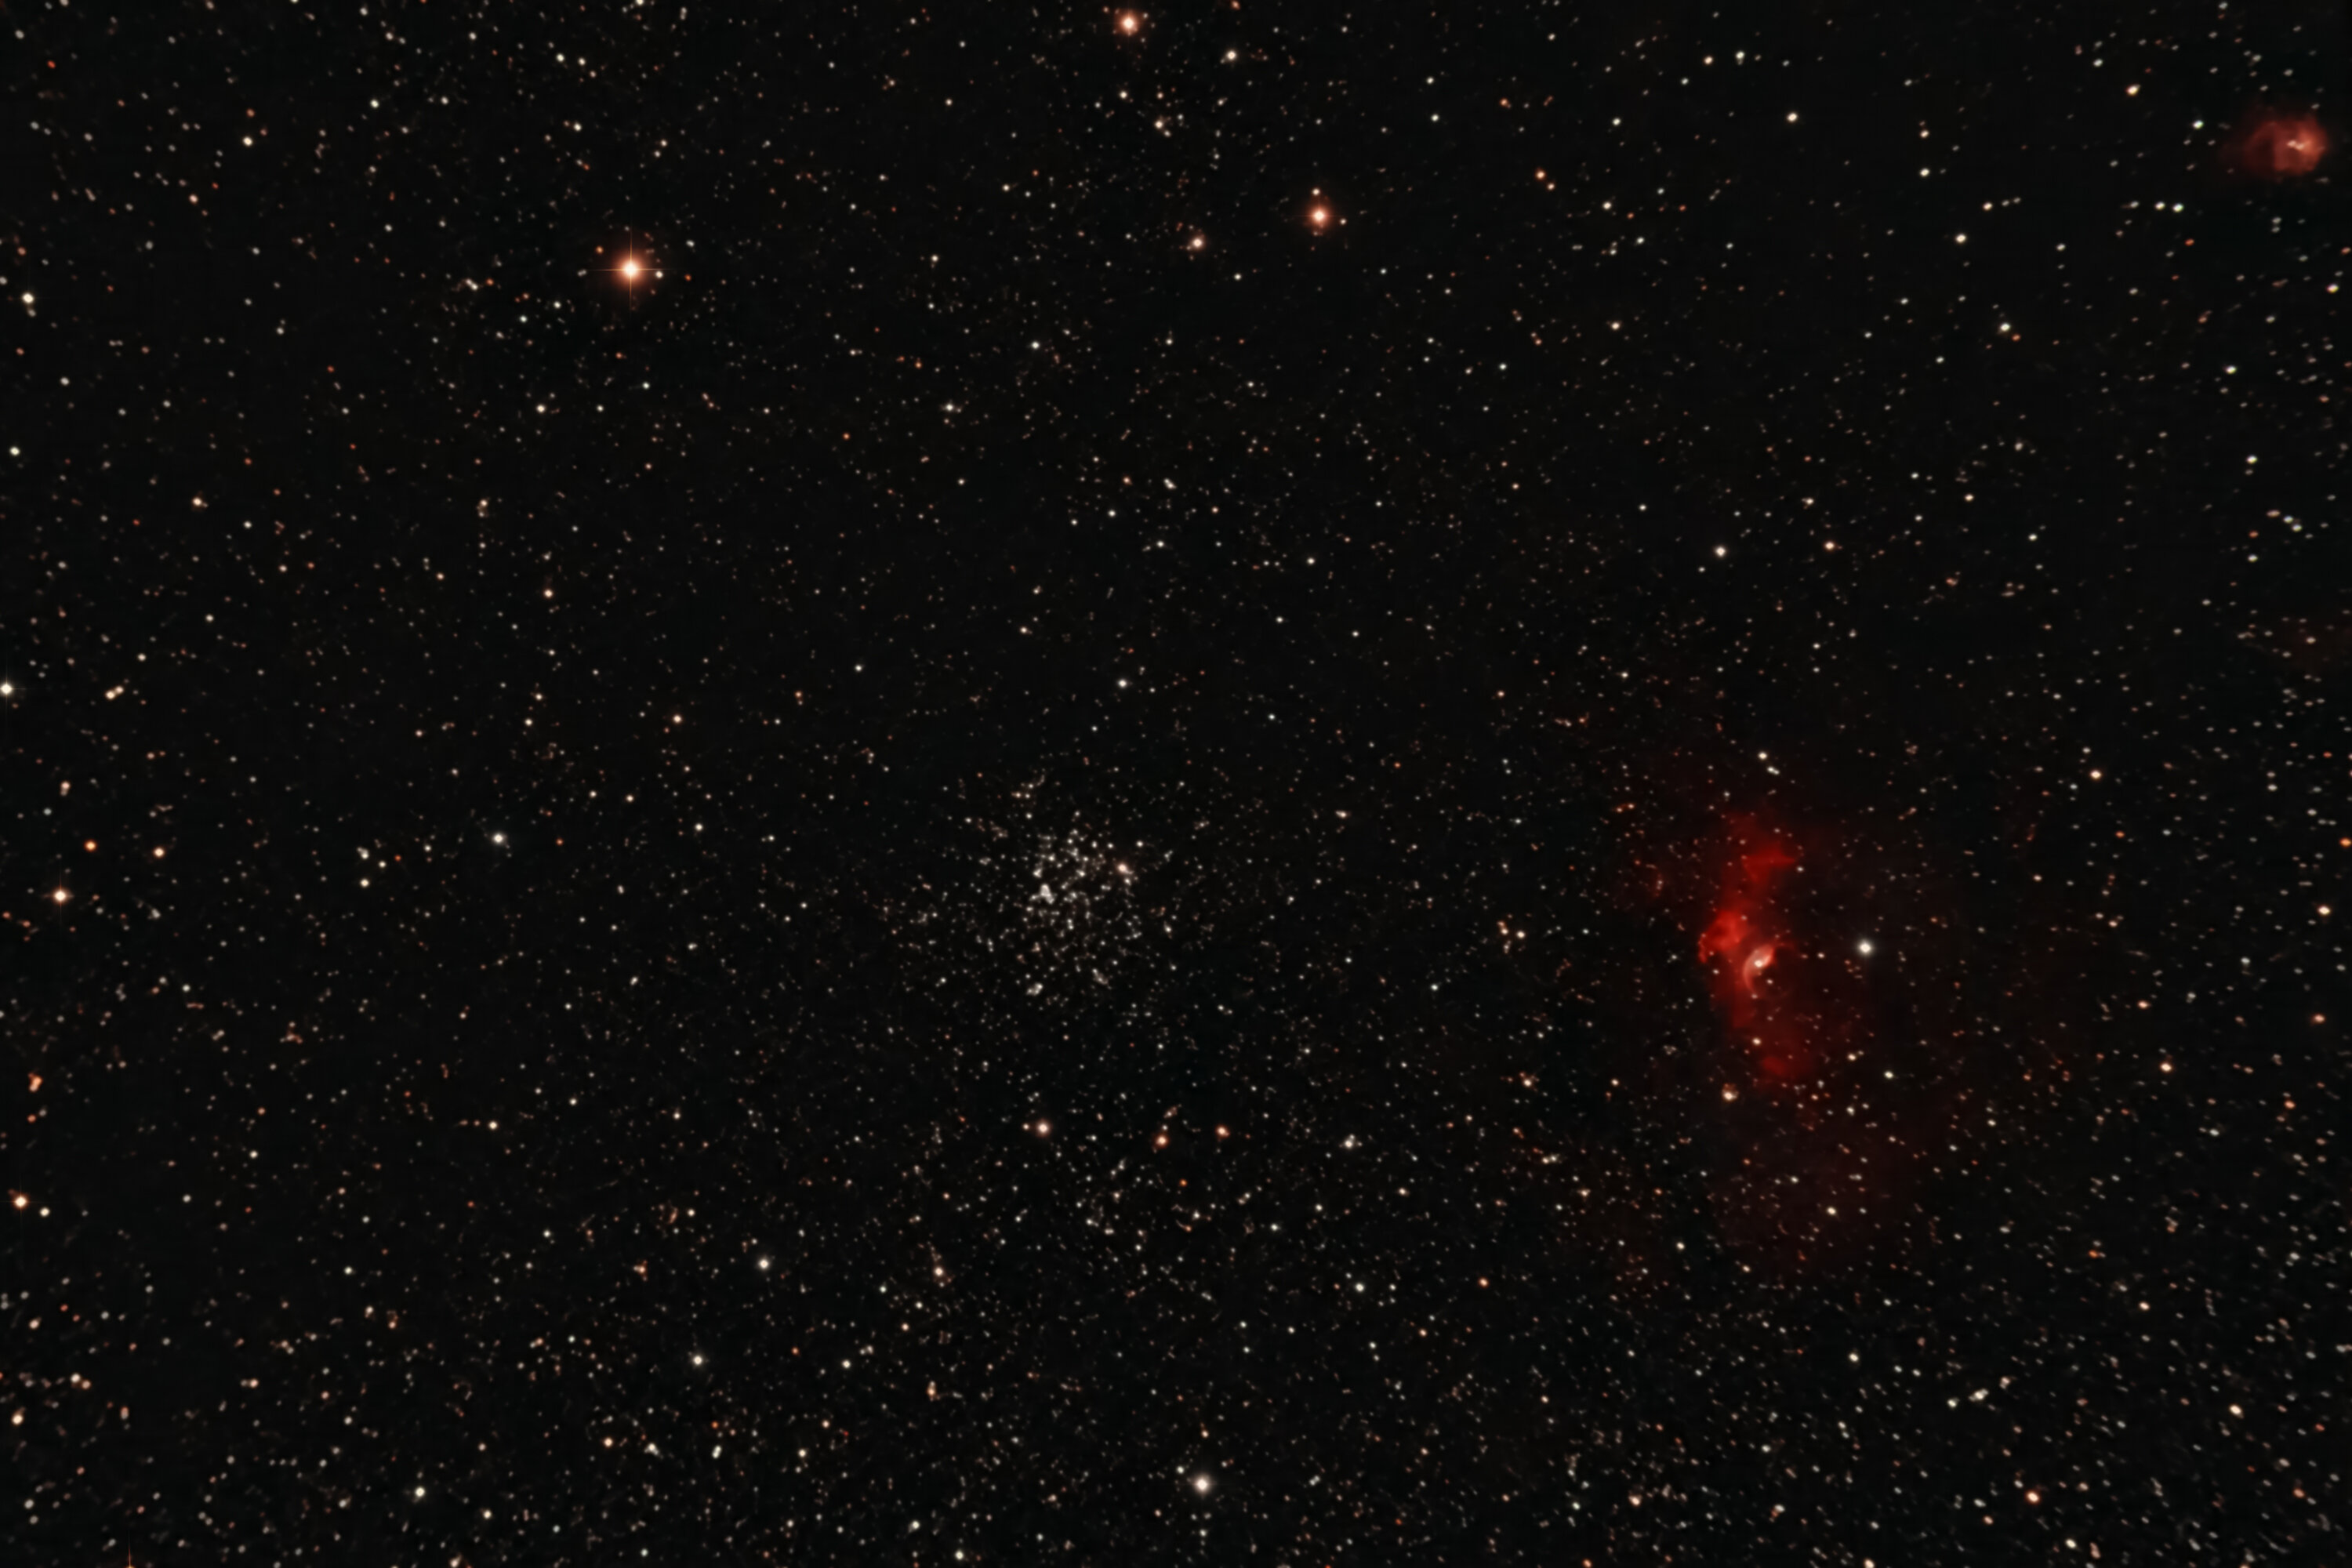 M52 - Salt-and-pepper Cluster & Ngc 7635 - The Bubble Nebula